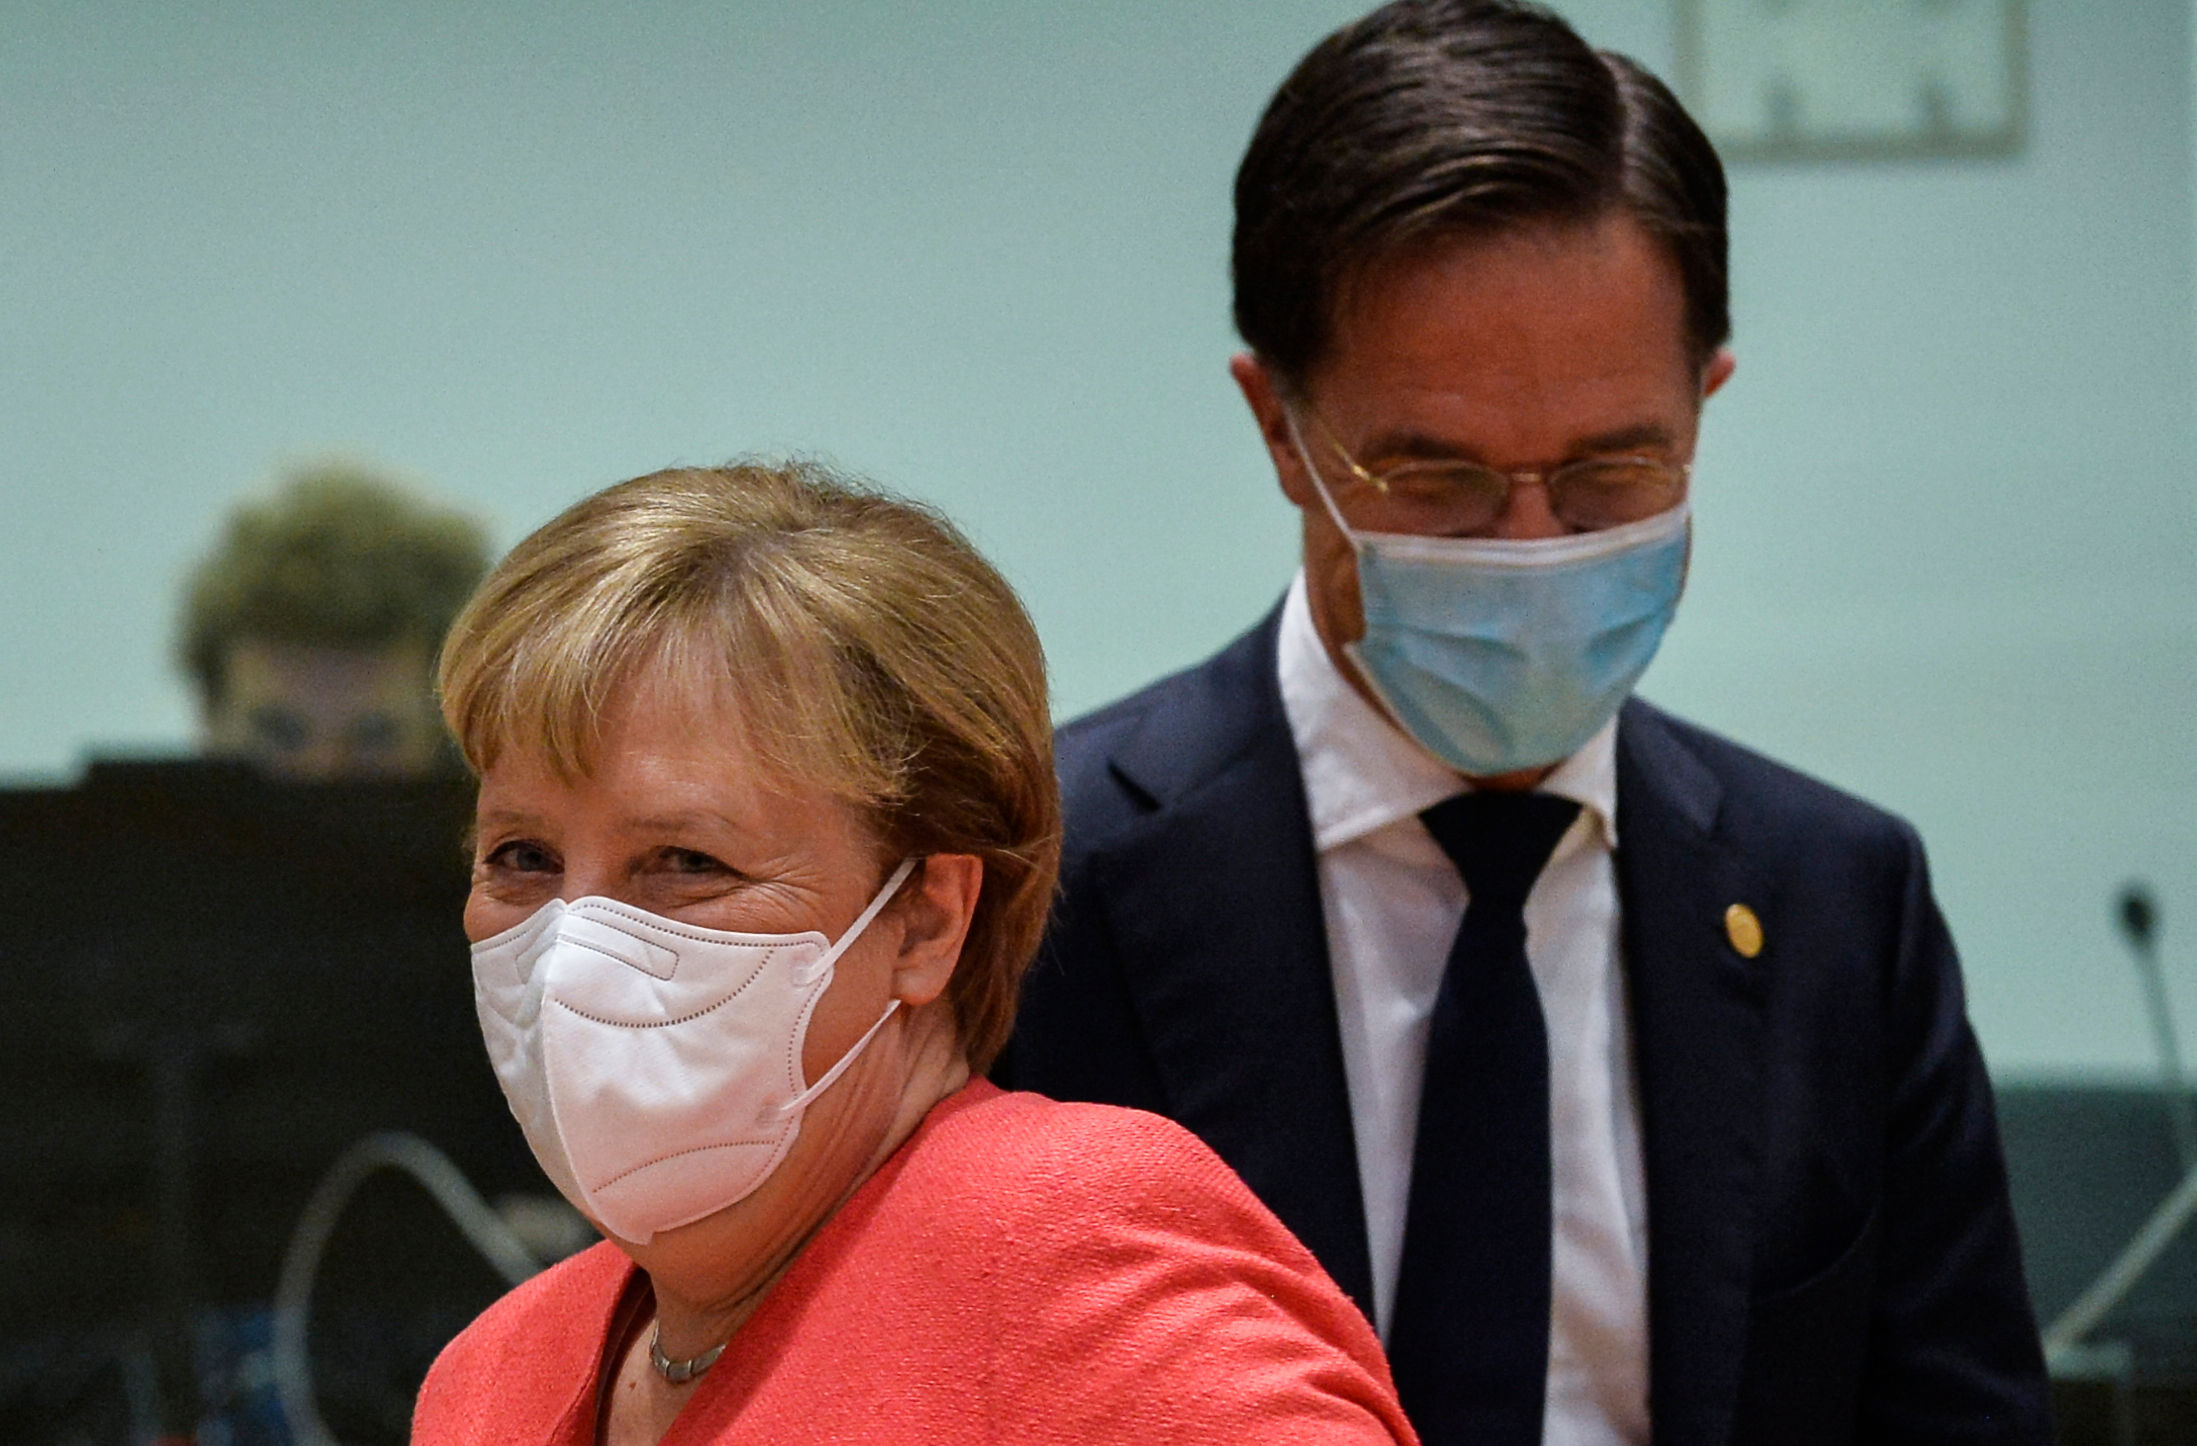 Coronavirus-induced lockdown for several more months, says German Economy minister